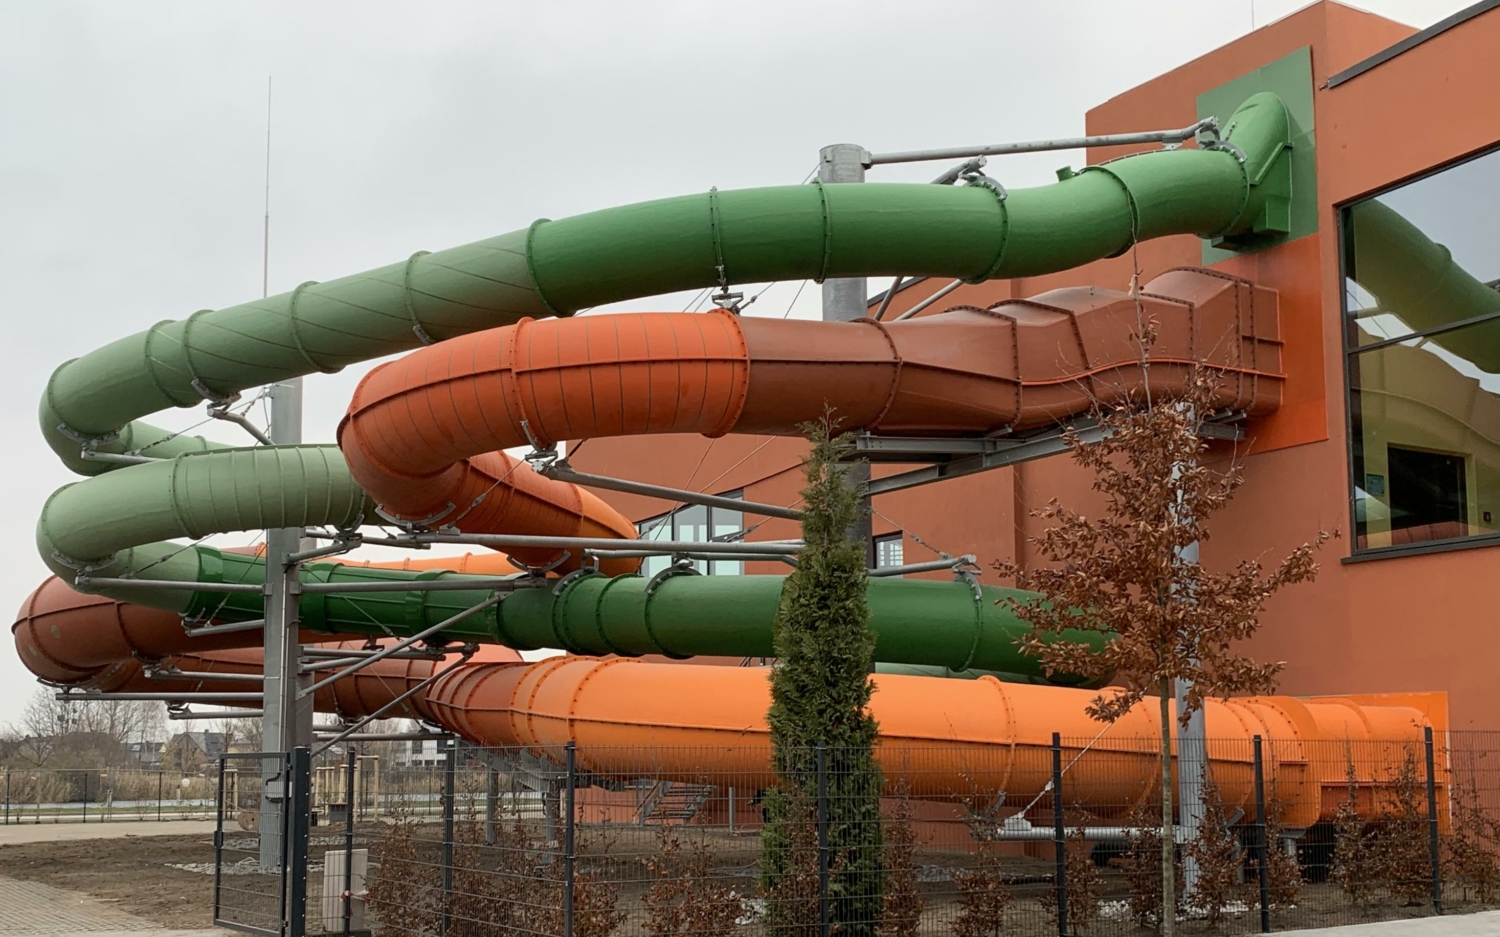 New Waterslides for Havel Therme in Werder - AQUARENA GmbH